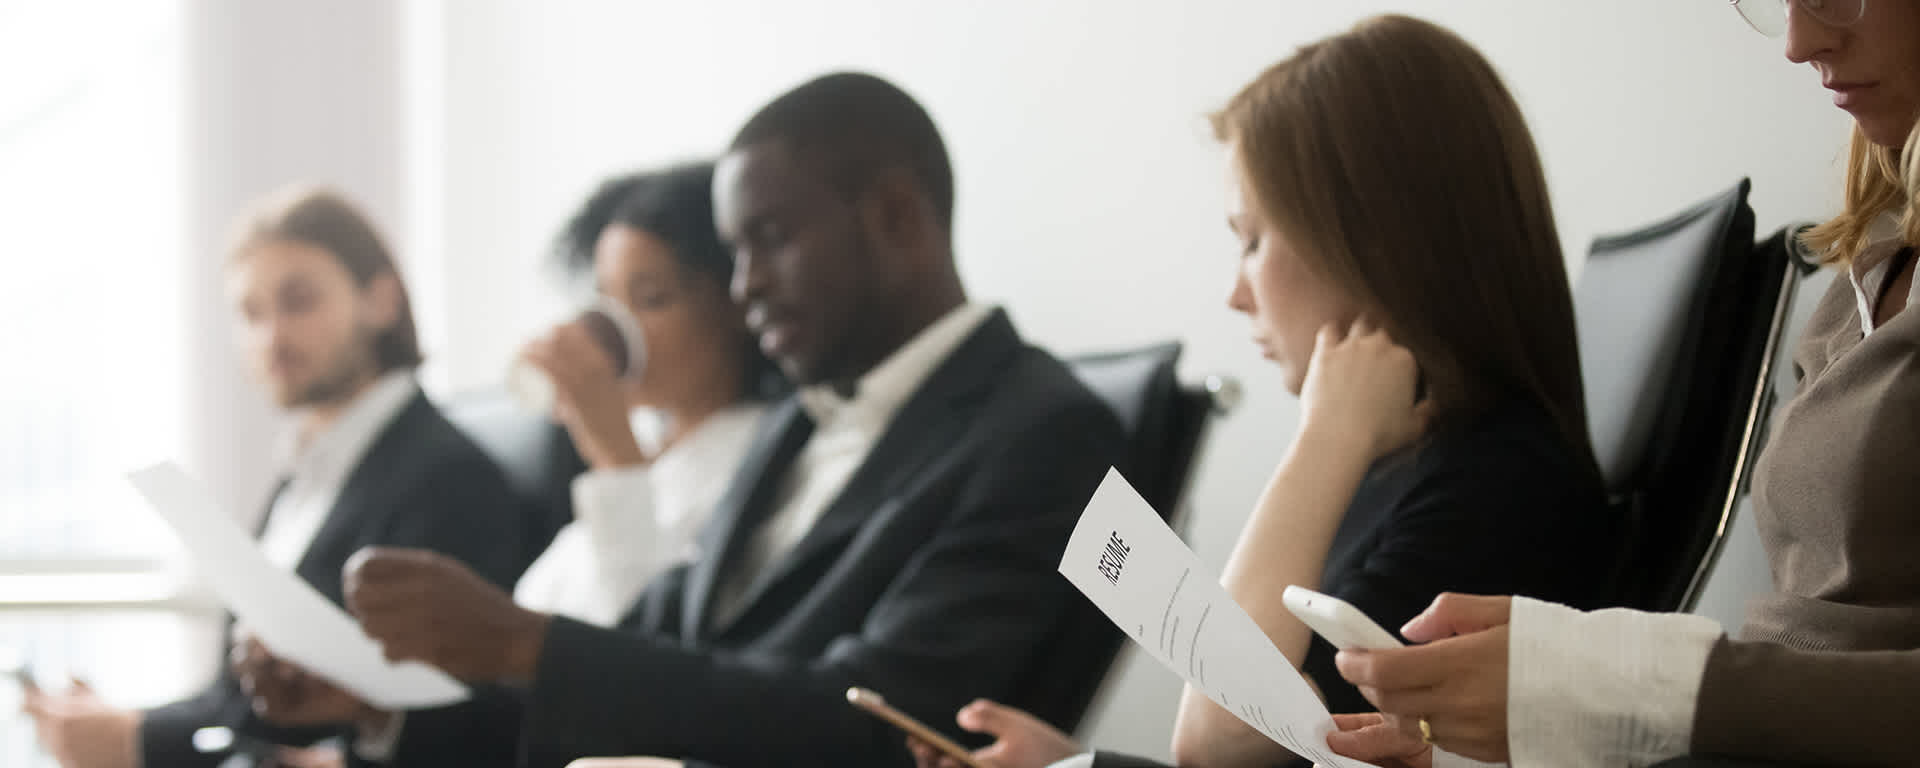 A diverse group of applicants prepare for their IT job interview | Blog